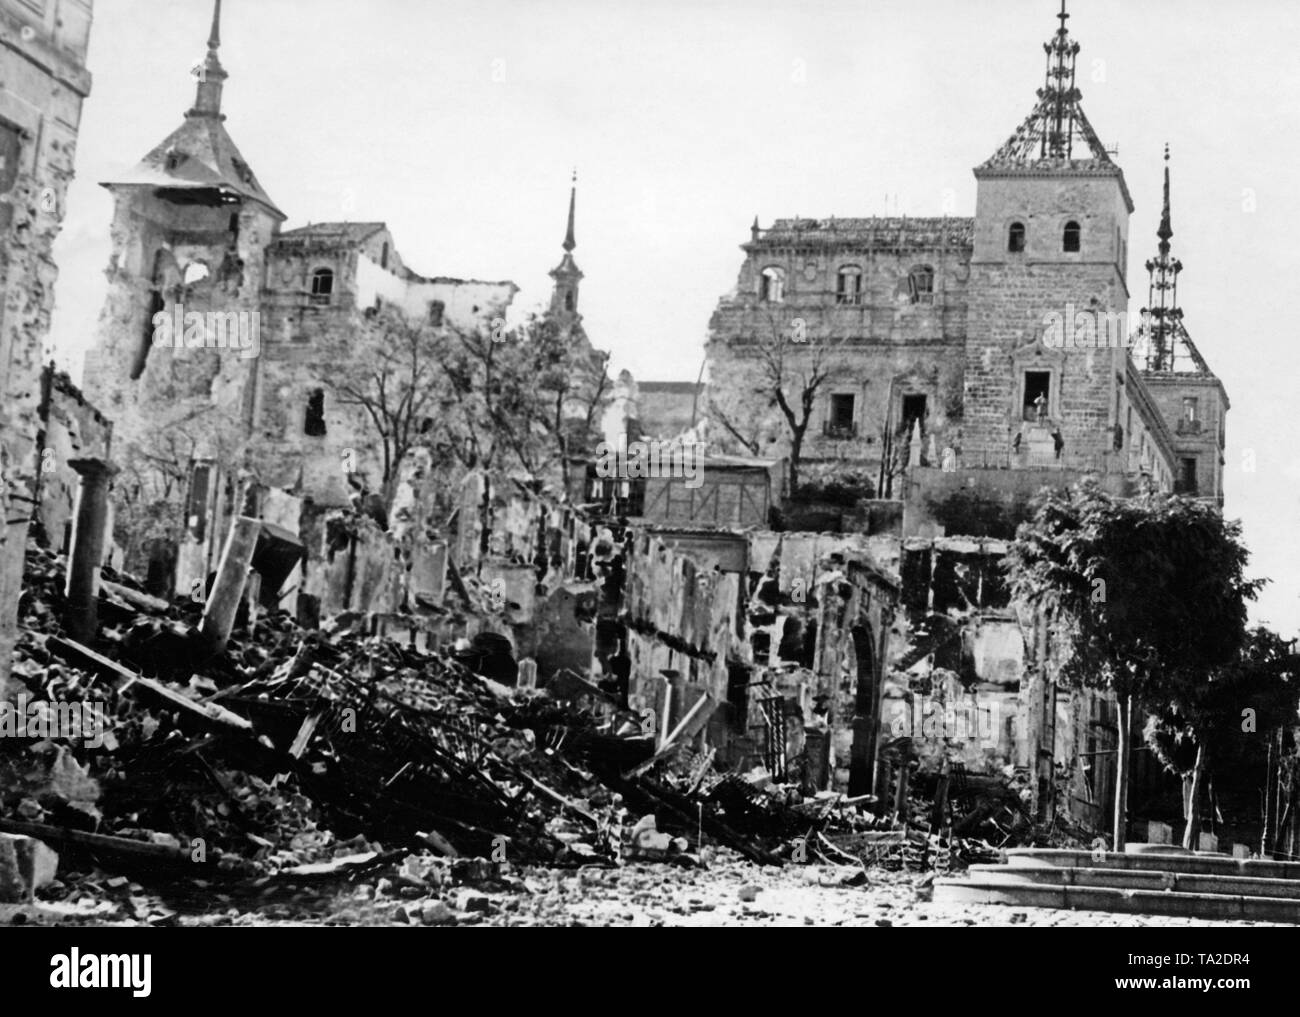 Photo of the partly destroyed Alcazar of Toledo after it had been liberated by Spanish national troops on September 26, 1936. Here, the partially collapsed walls and the four towers of the fortress. Stock Photo